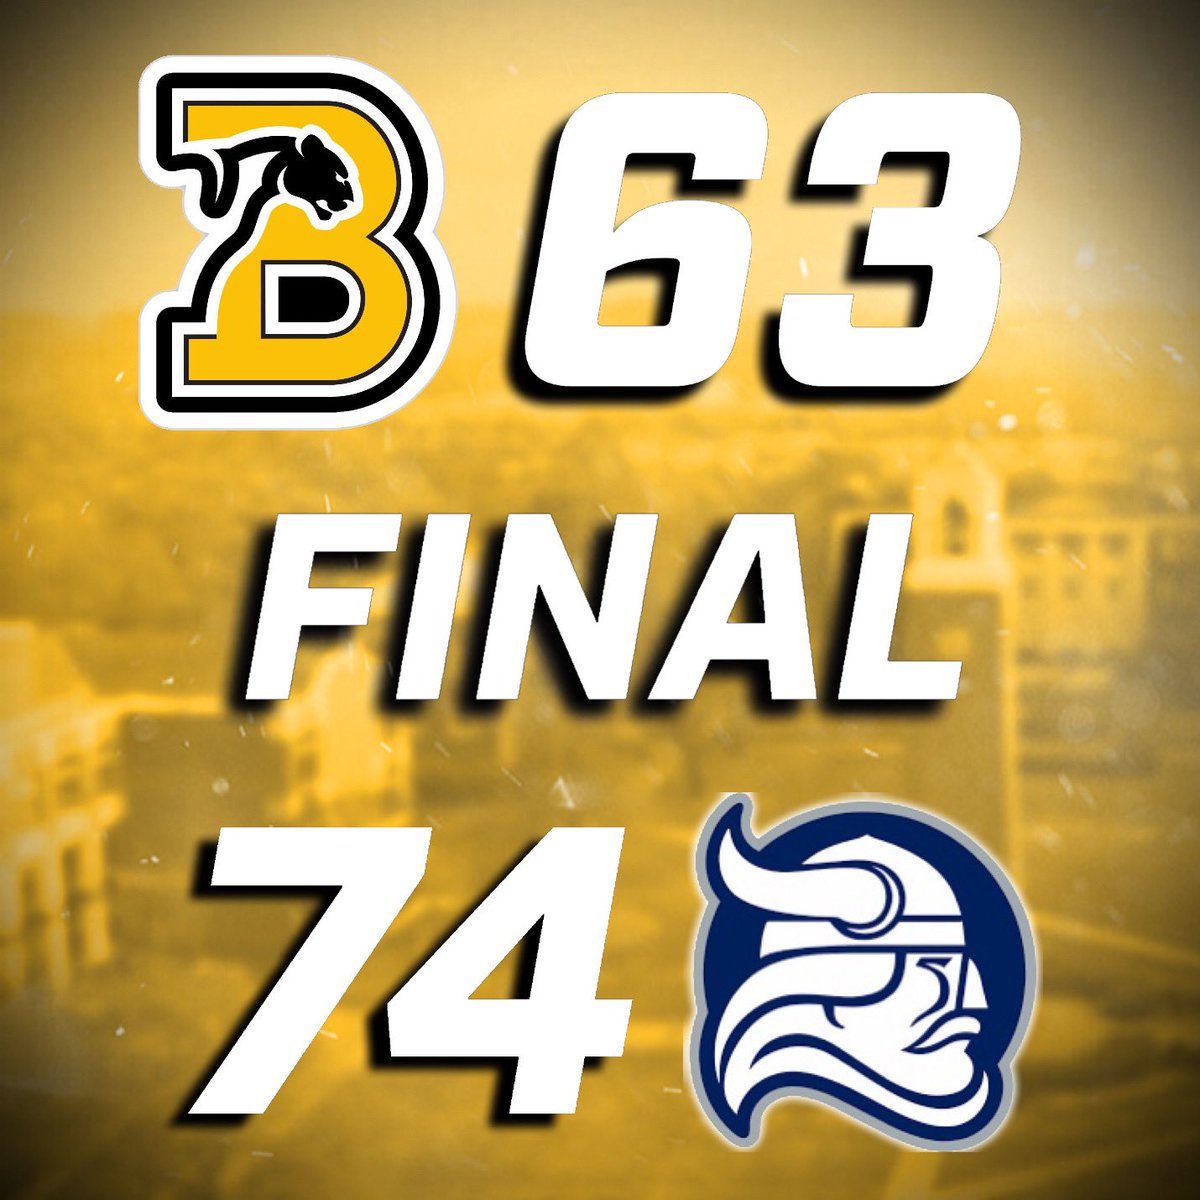 Tough battle at Berry. On to Oglethorpe. #yeahpanthers